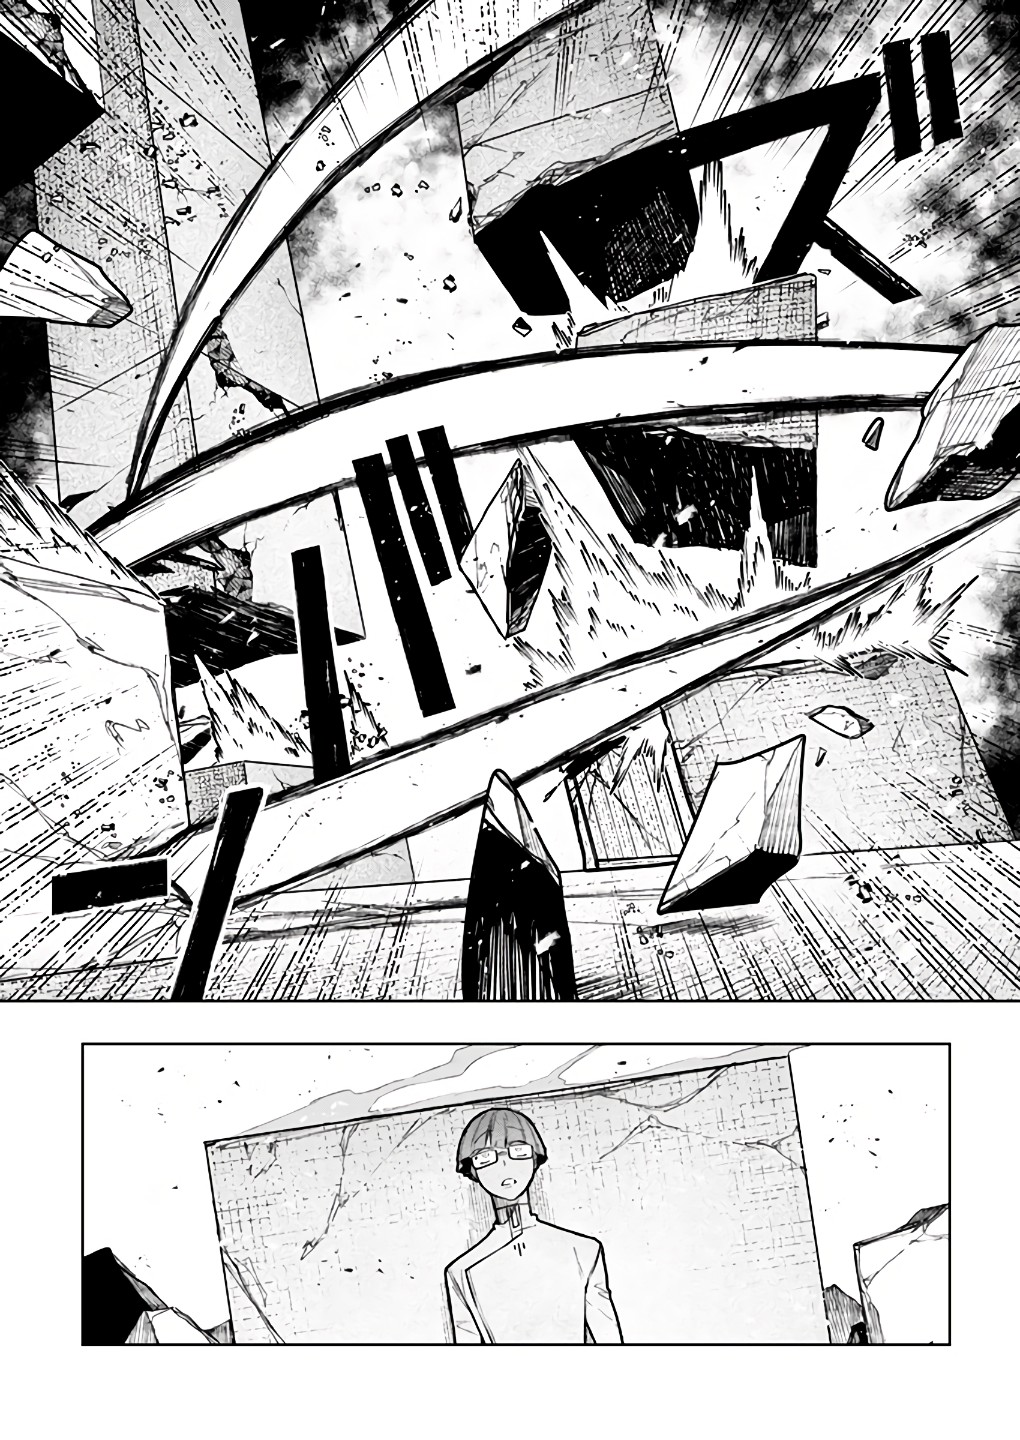 DISC] My companion is the strongest undead in another world - Chapter 1 - 2  : r/manga